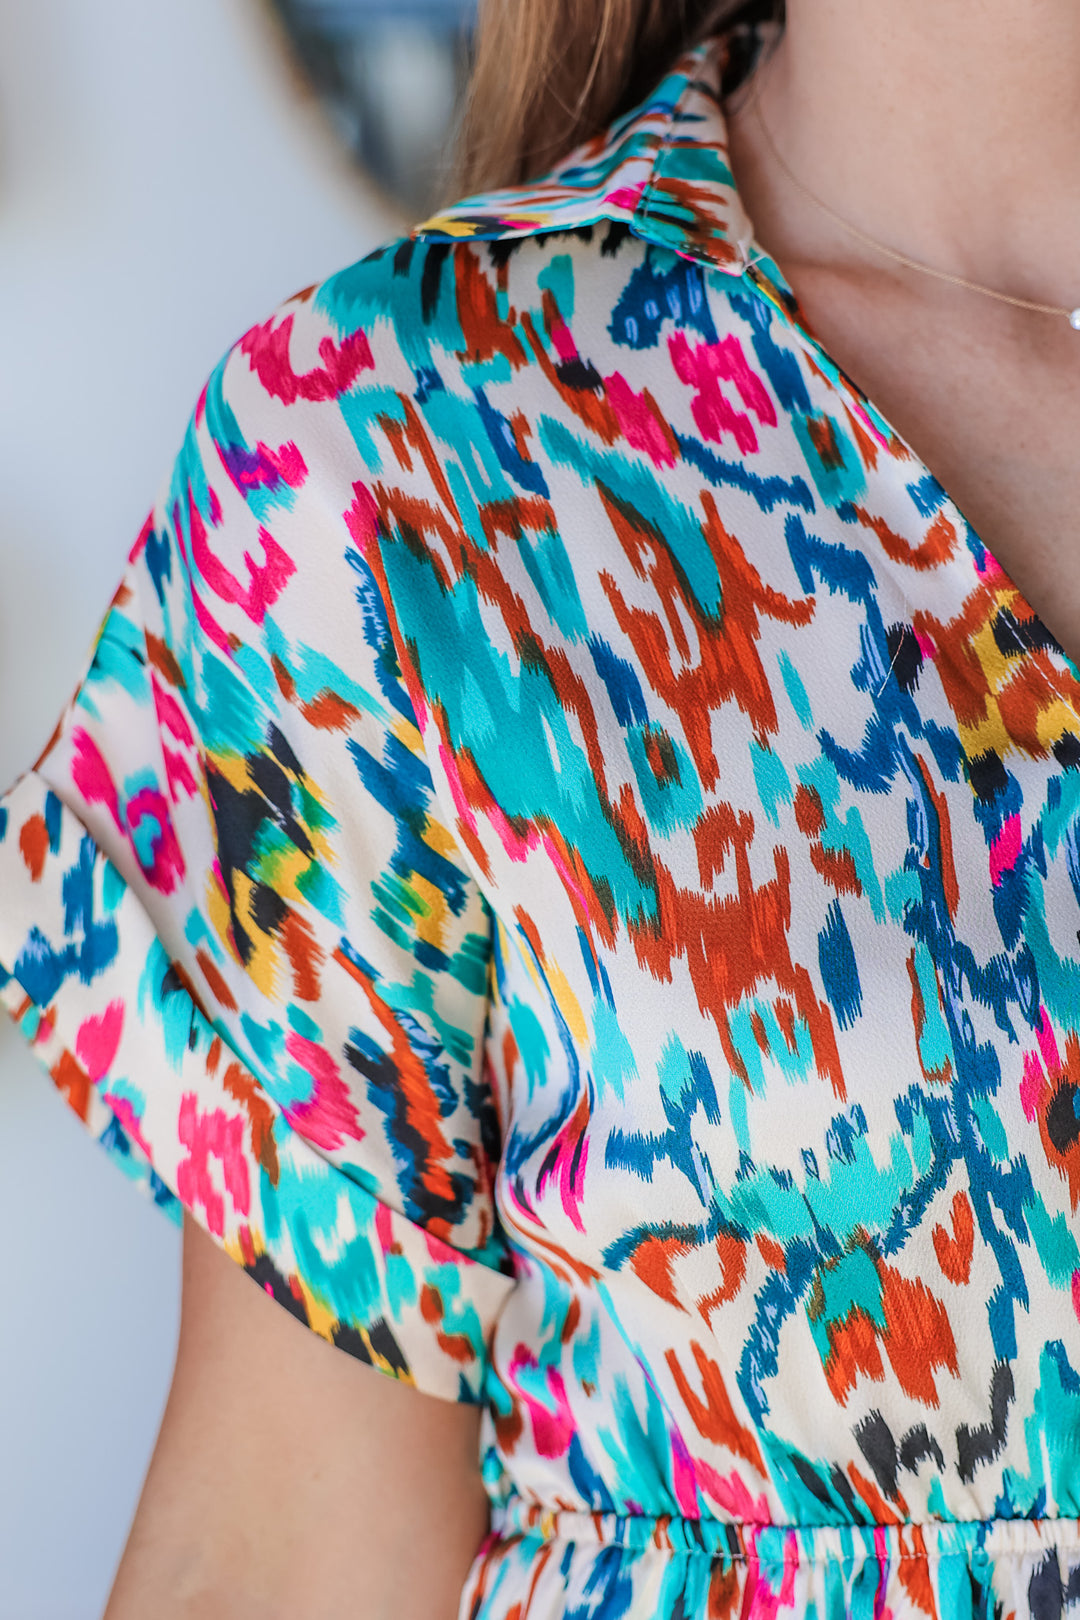 A closeup of the shoulder of a woman wearing a short sleeve abstract print dress with colors of teal, blue, green, pink, yellow, orange and white.